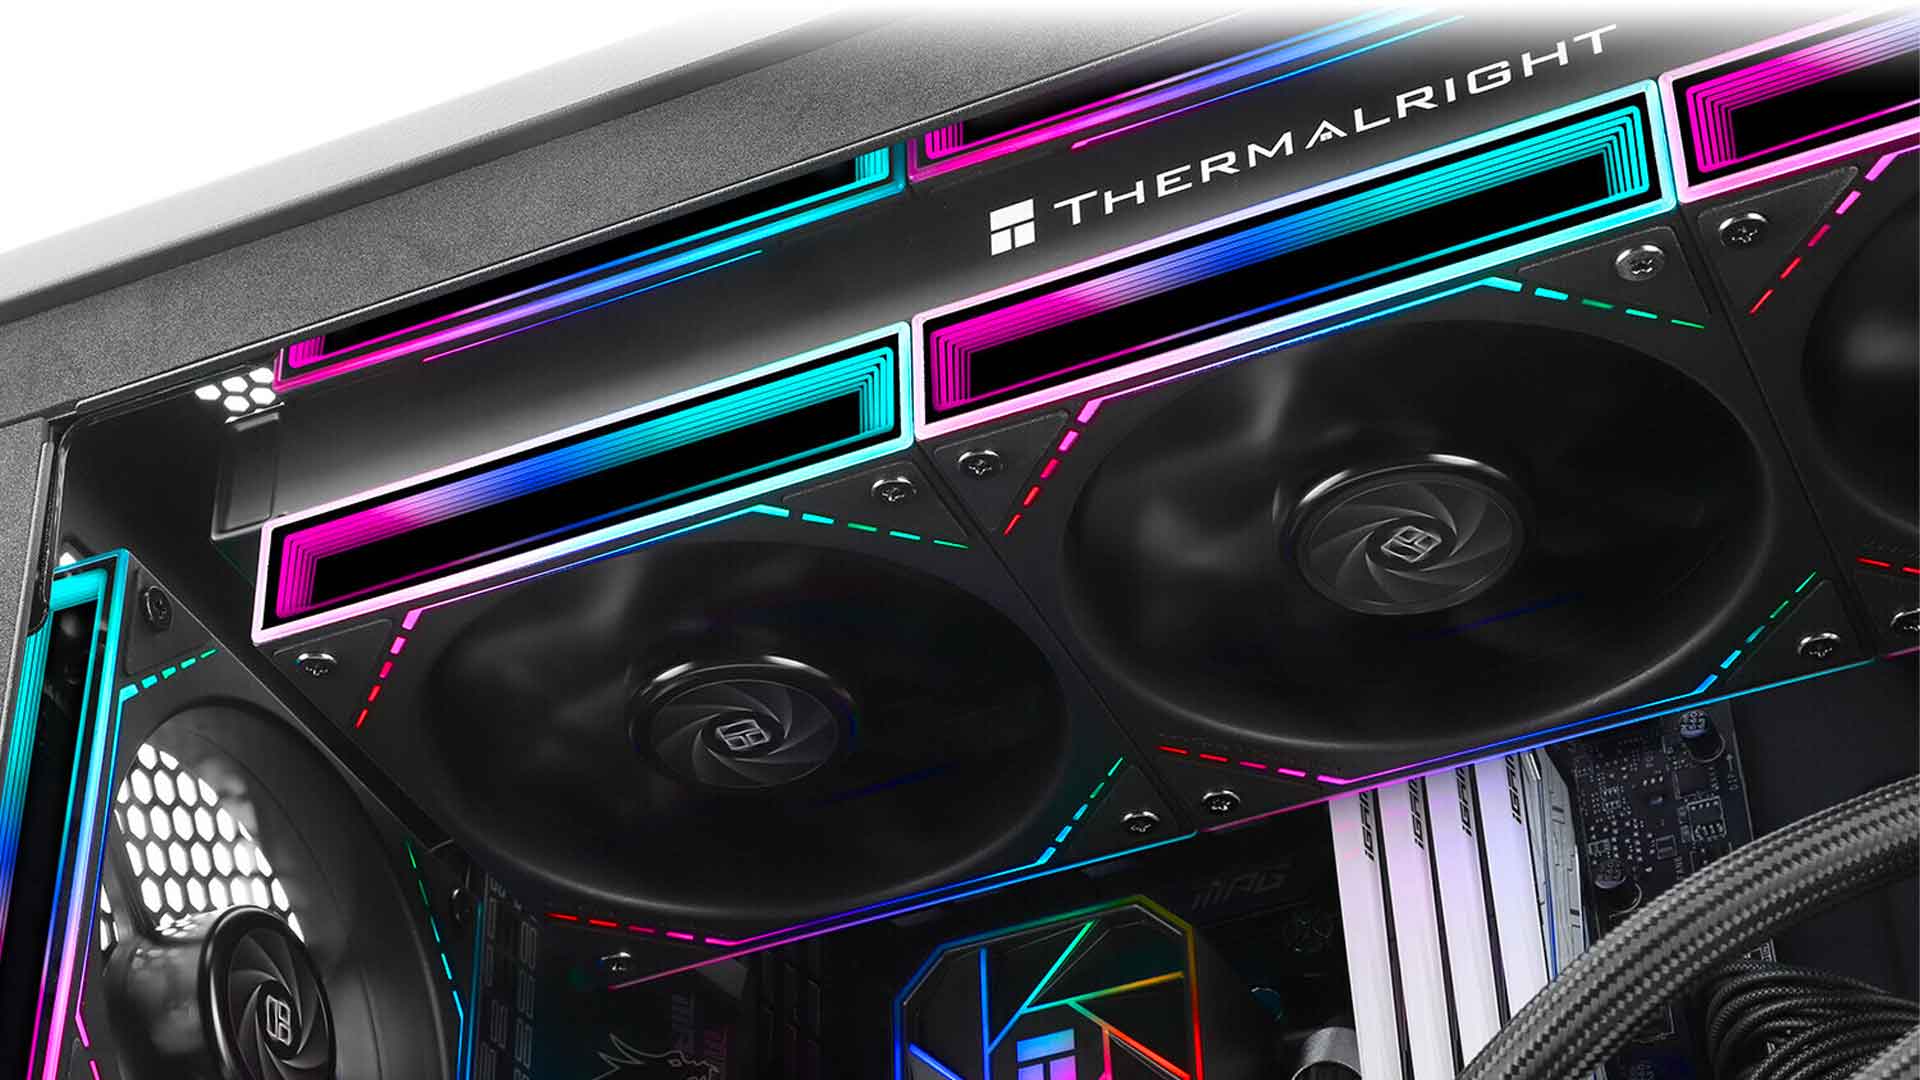 Ventilateur TL-M12, Thermalright propose une robe à effets infinis - GinjFo